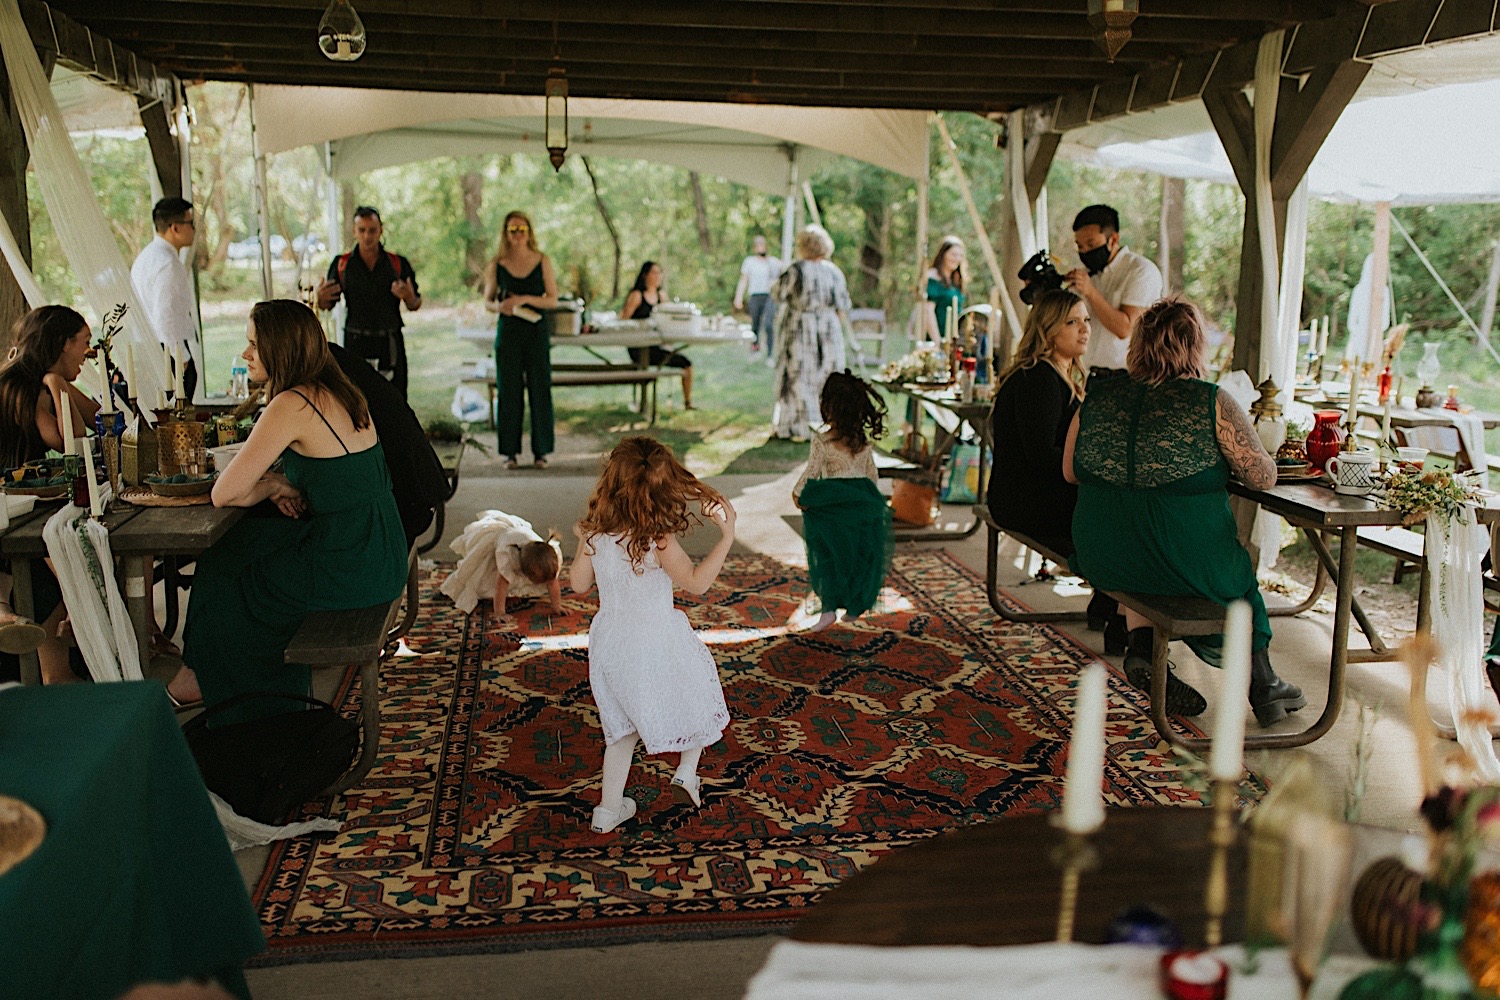 Children dance together while under a tent during an outdoor wedding reception